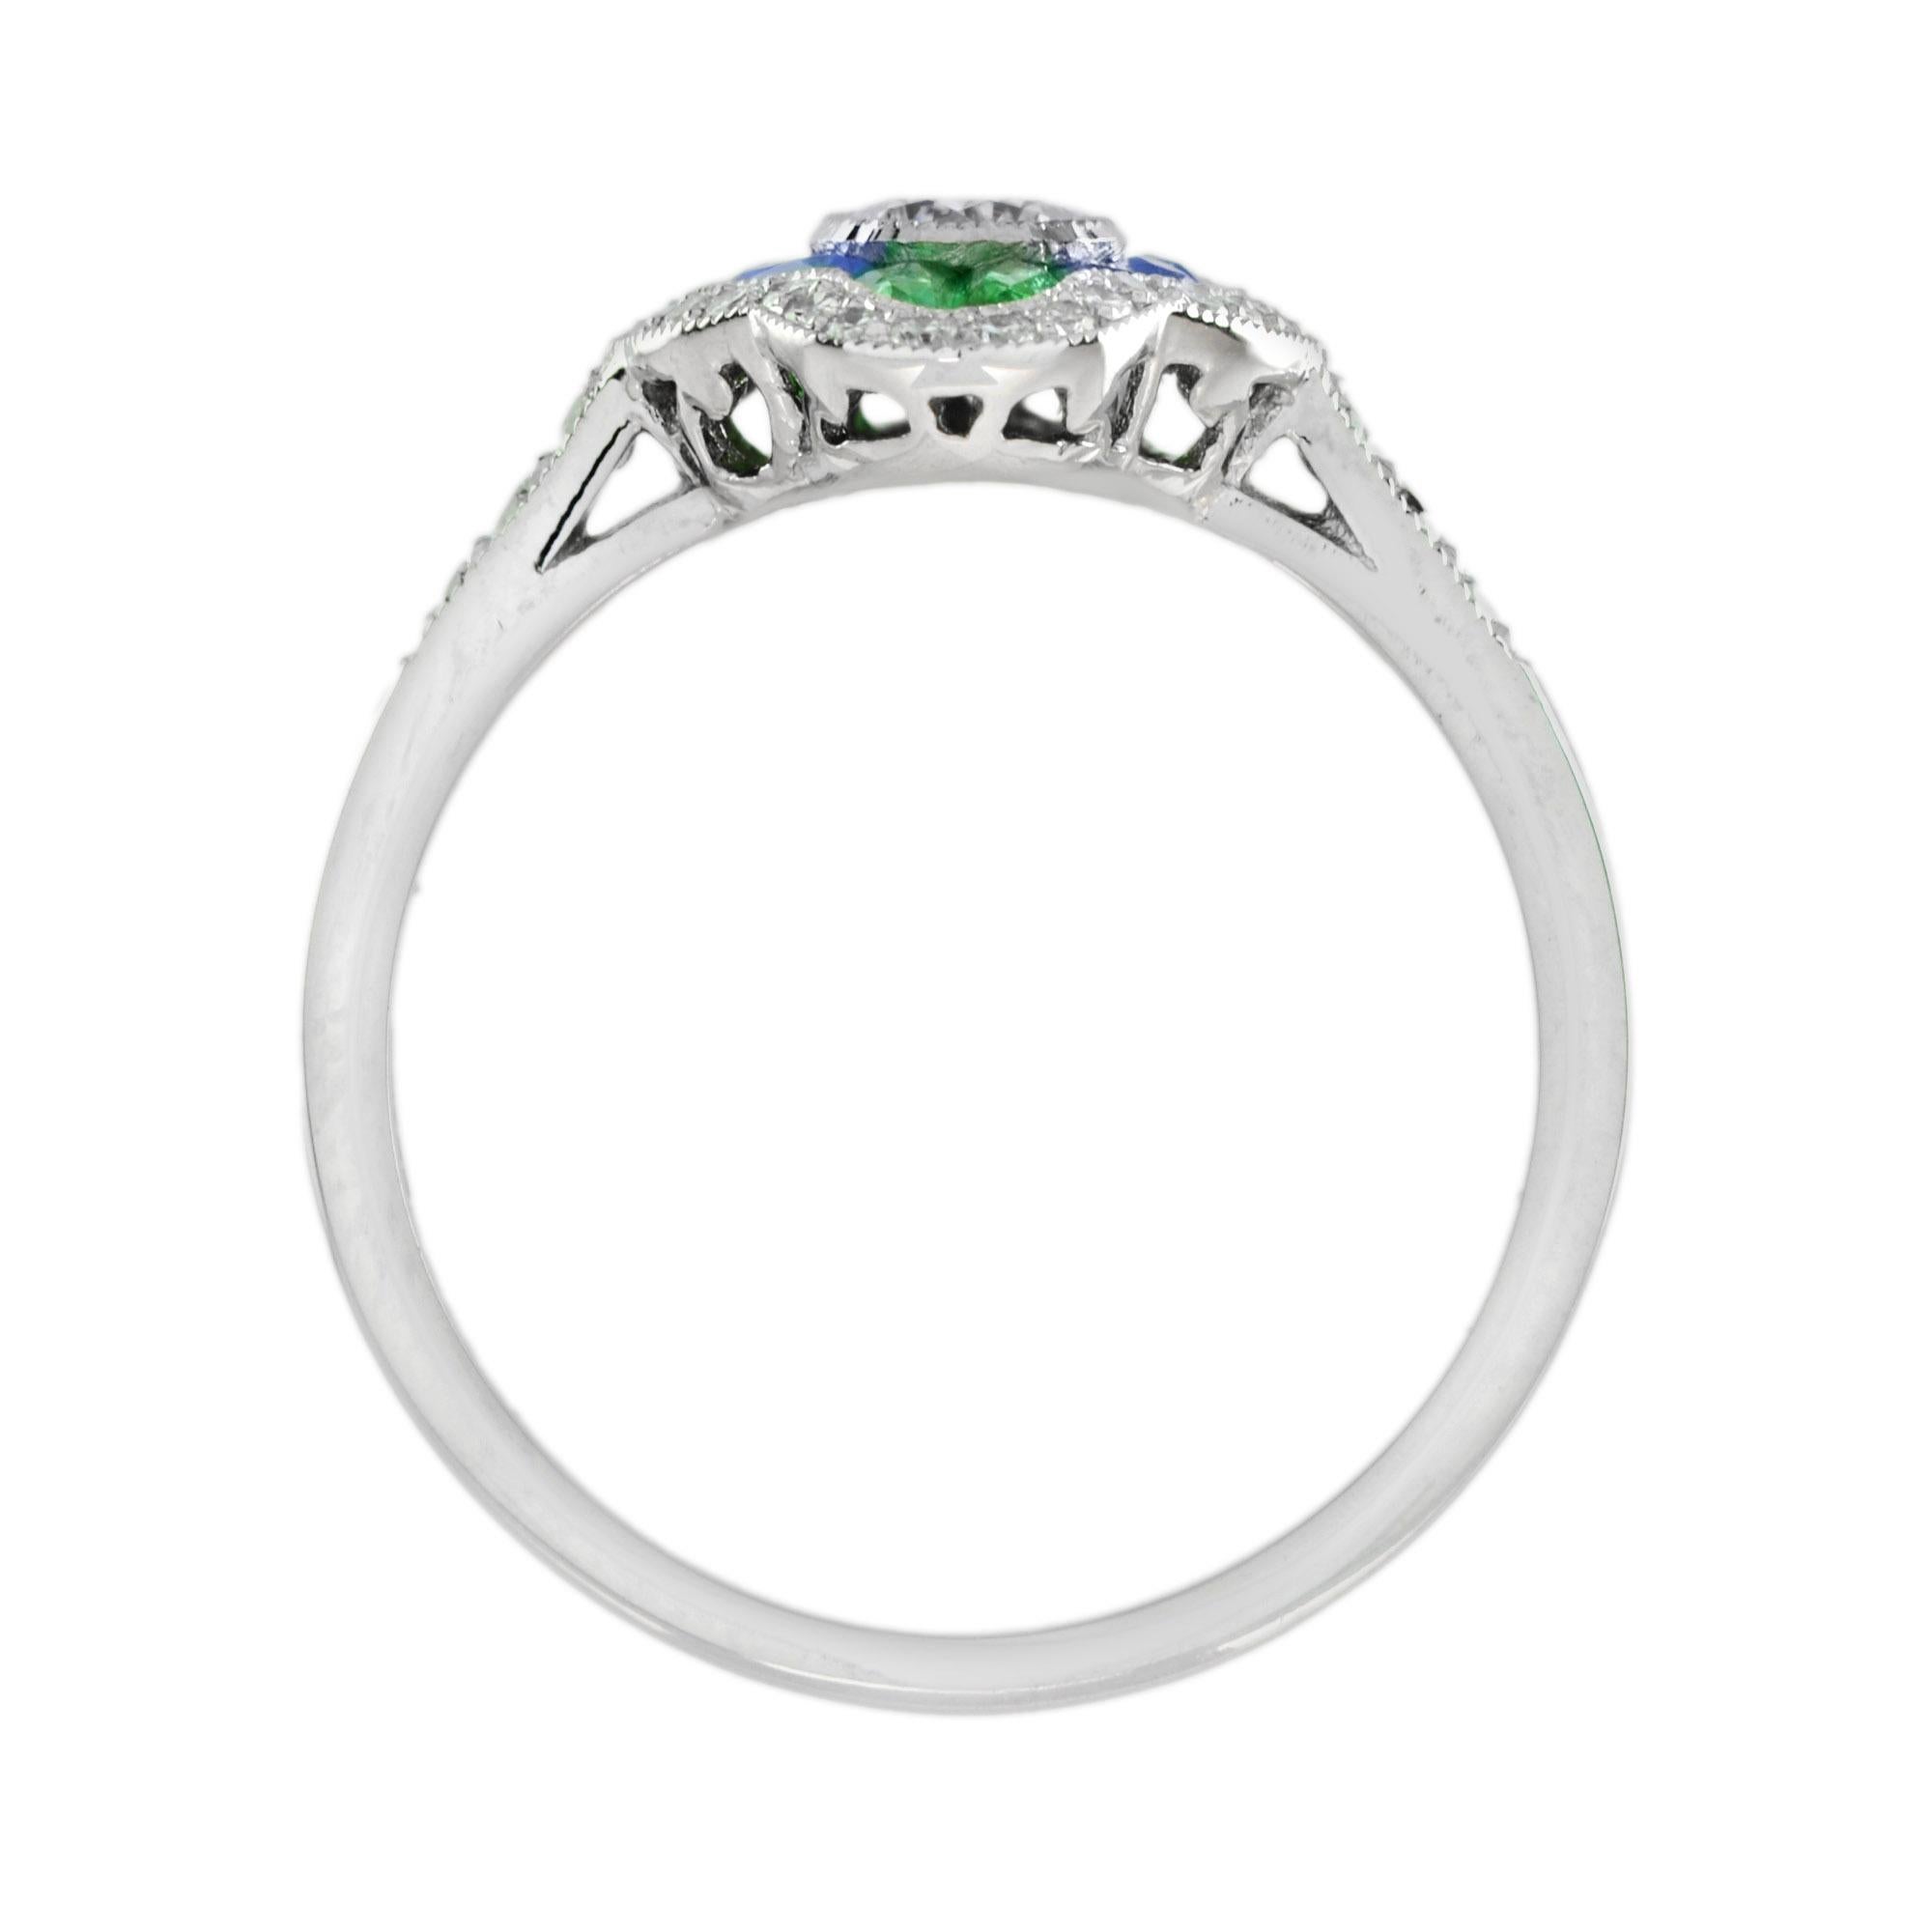 For Sale:  Diamond Sapphire Emerald Art Deco Style Engagement Ring in 18k White Gold 6